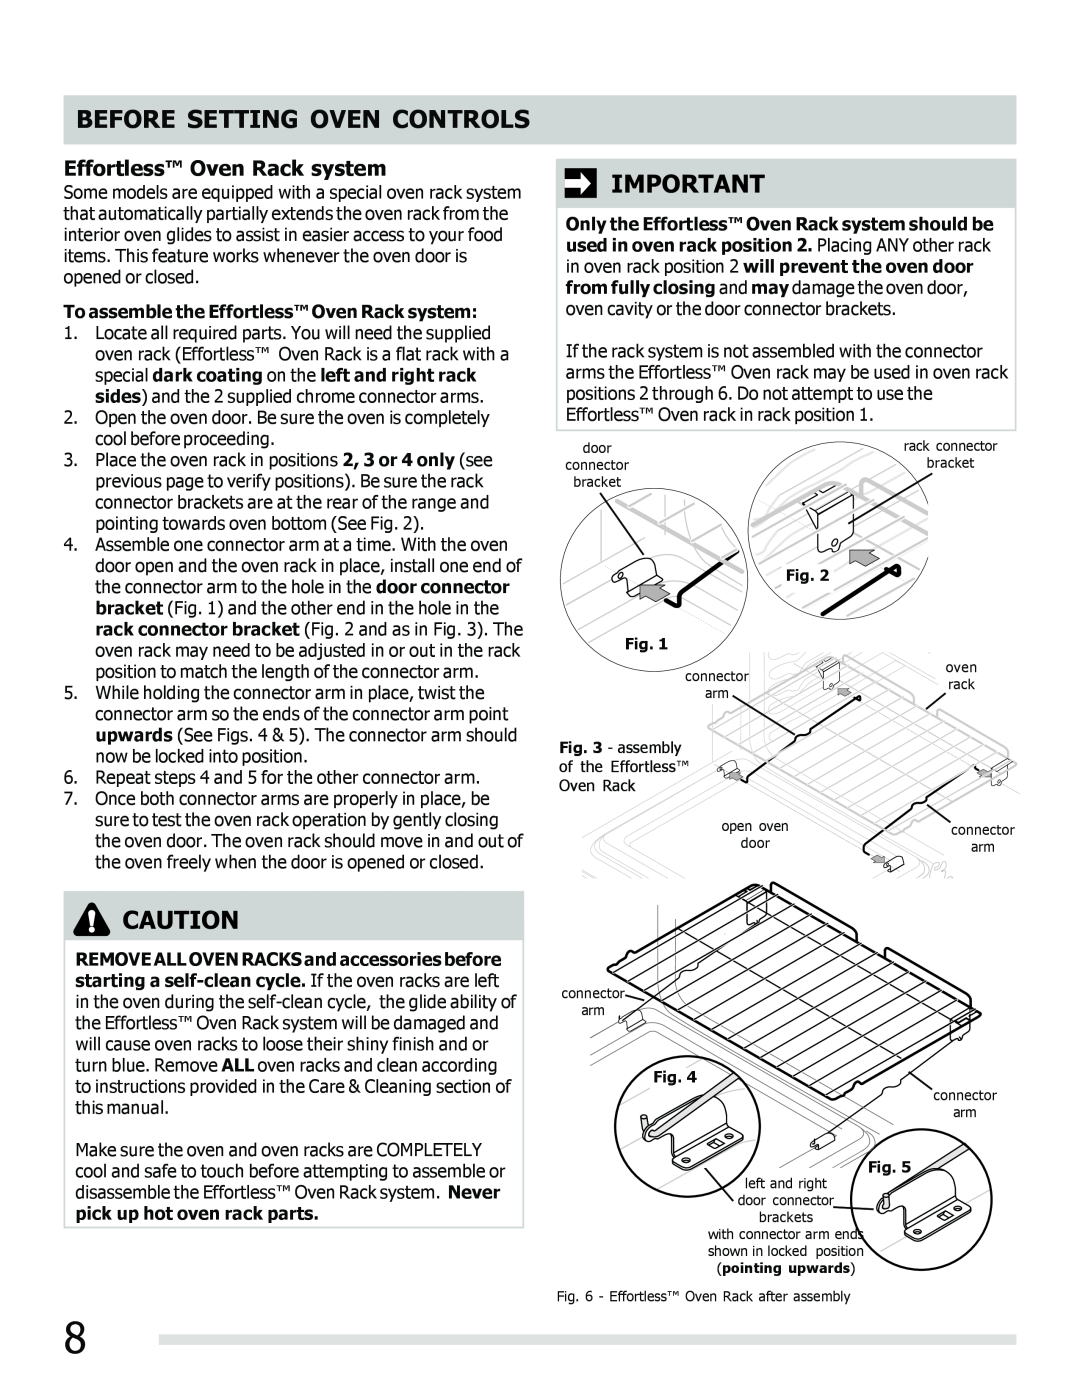 Frigidaire 316902202 important safety instructions Effortless Oven Rack system, Before Setting Oven Controls 